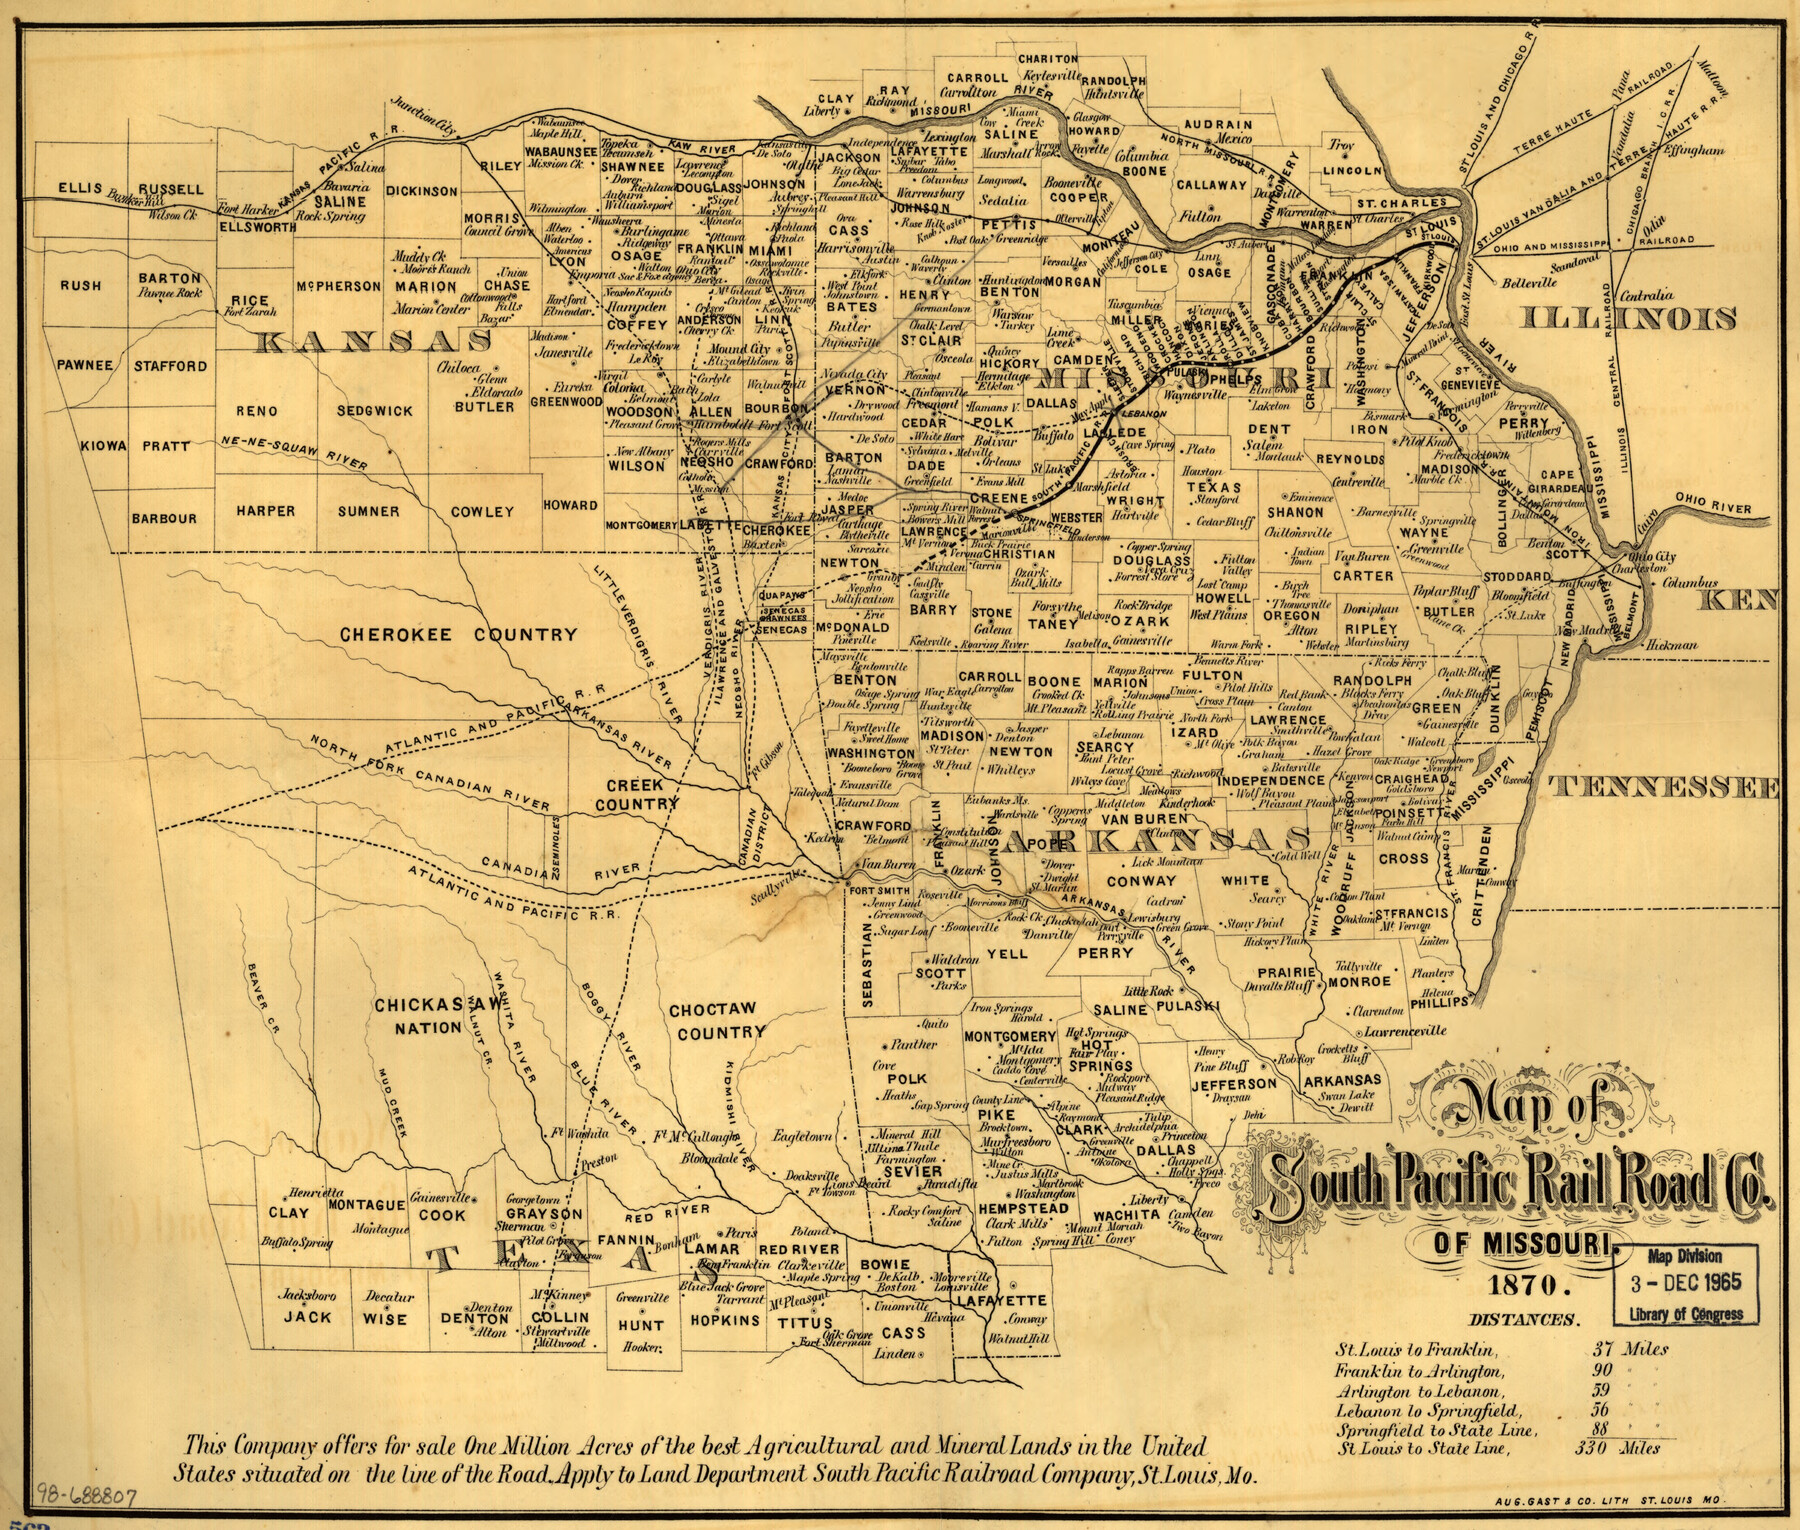 93613, Map of South Pacific Rail Road Co. of Missouri., Library of Congress